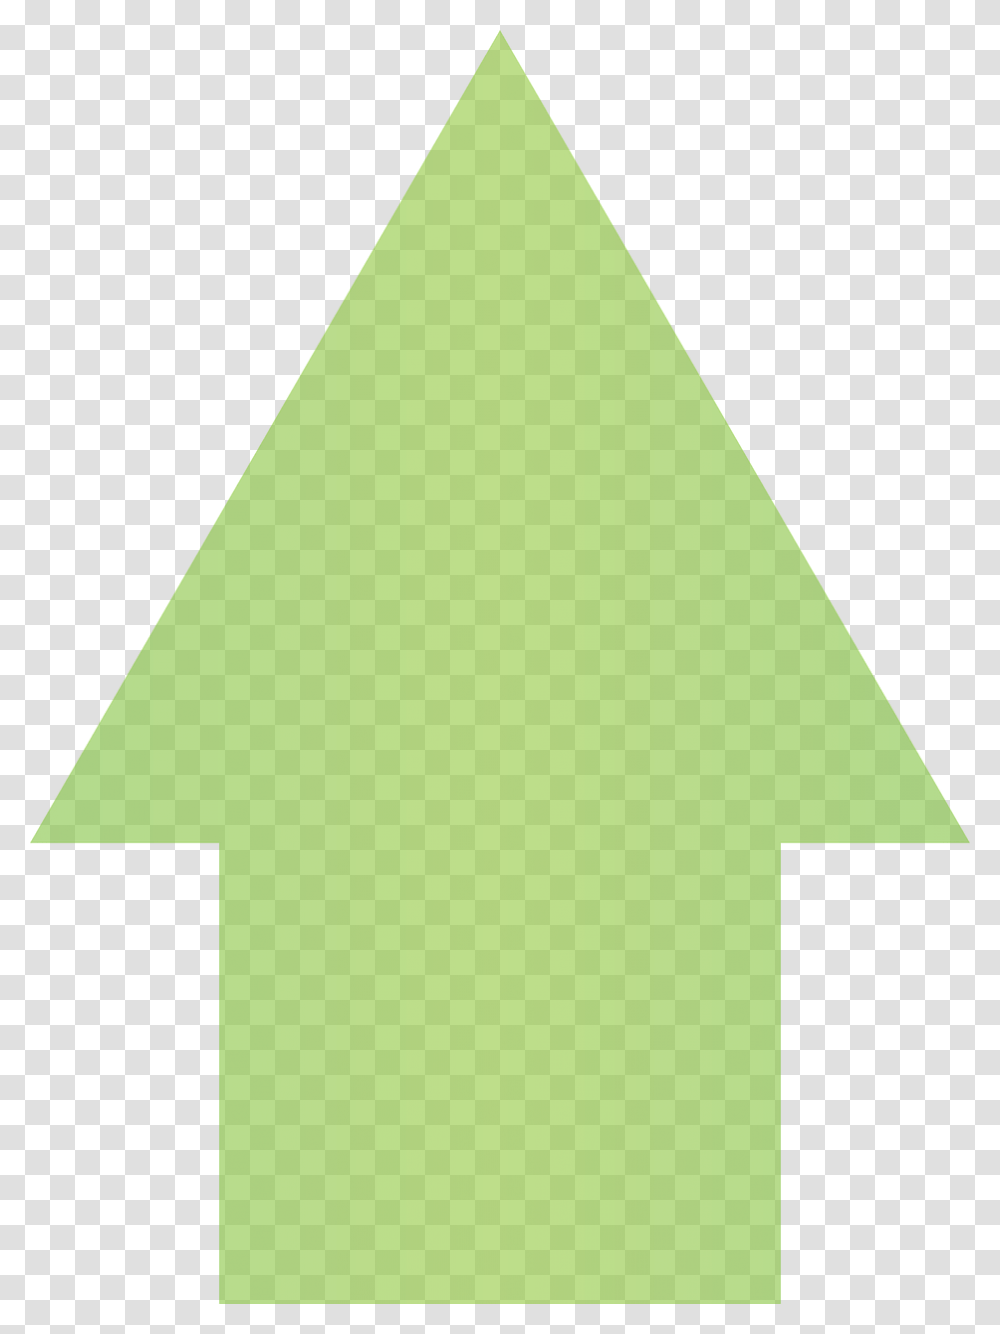 Up Upload Arrow Free Picture Green Arrow Up Icon Background, Number, Triangle Transparent Png